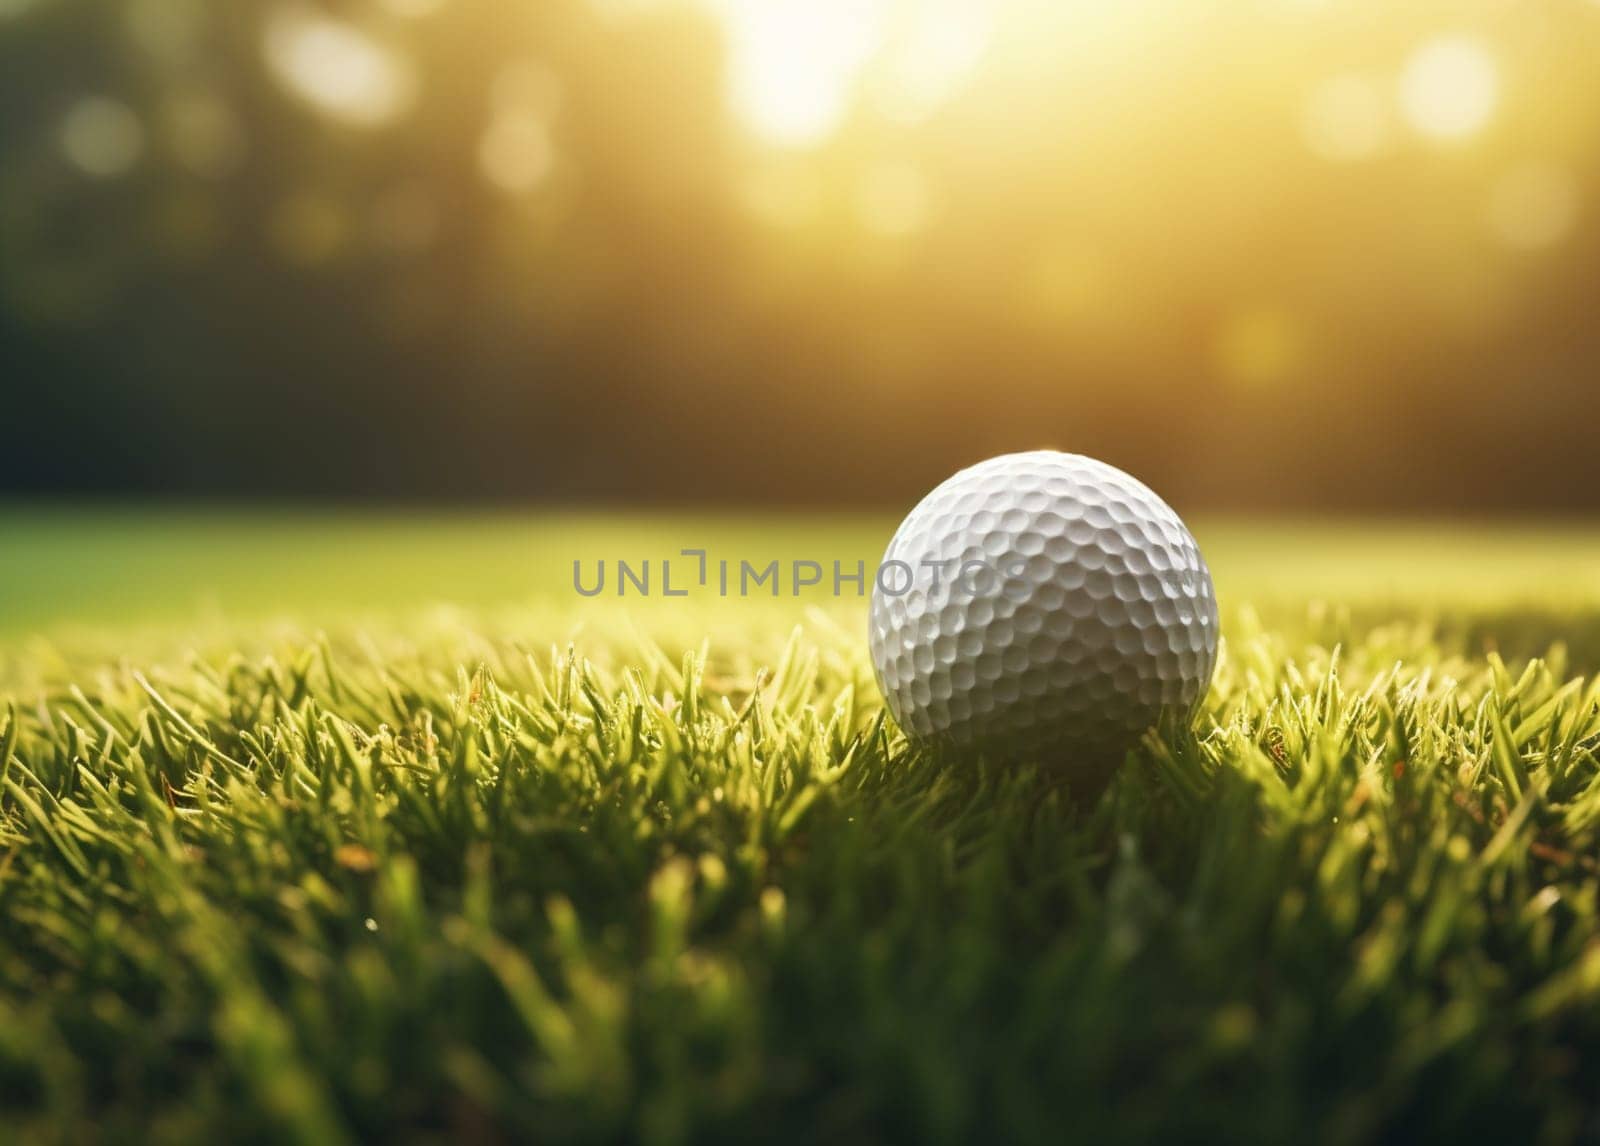 The white golf ball is positioned in a high green grass, one of the obstacles to golf. High quality photo